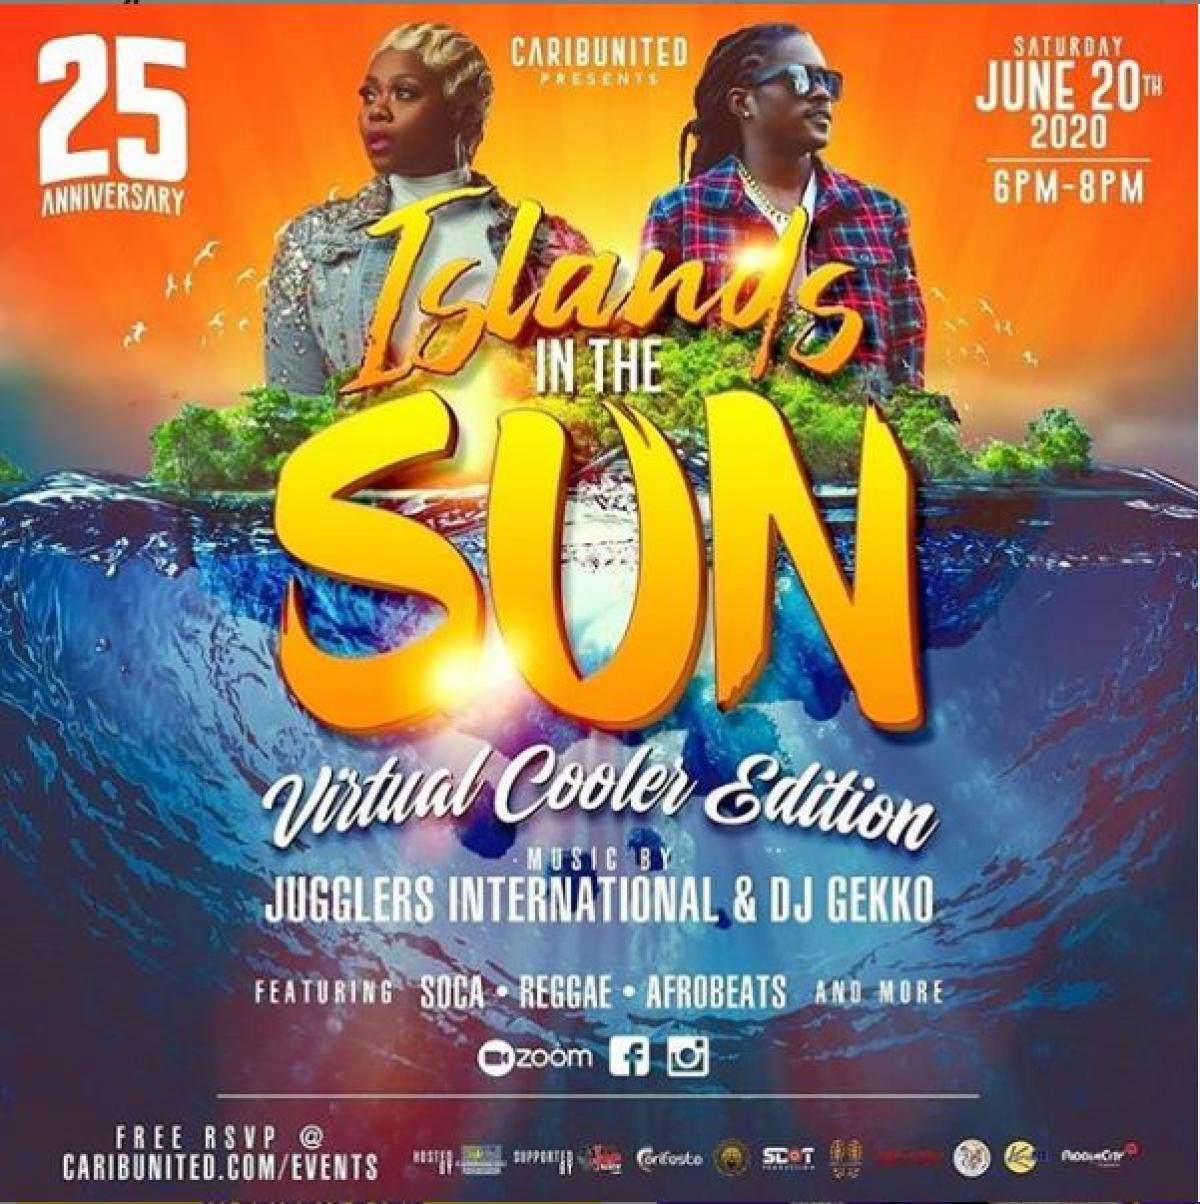 Island In The Sun Virtual Cooler Edtion  flyer or graphic.